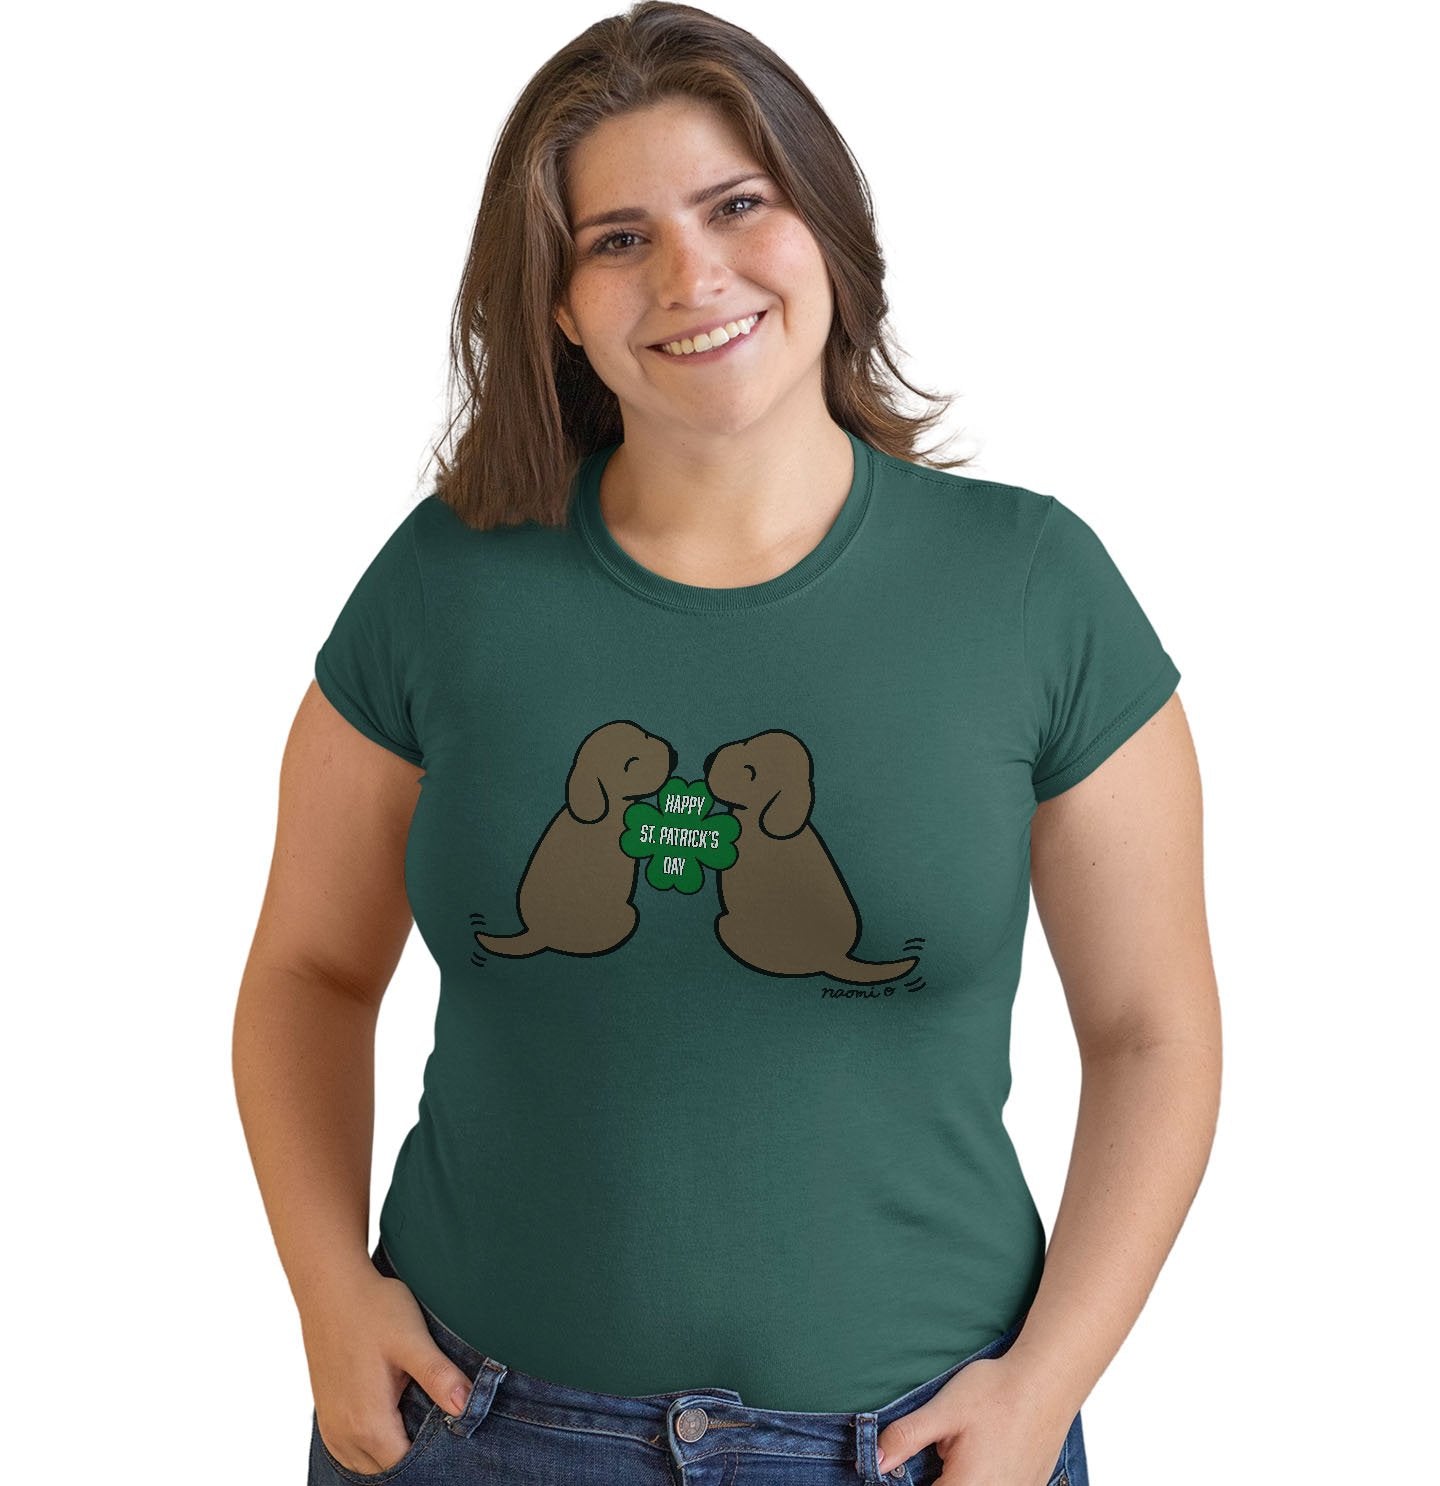 Happy St. Patrick's Day Chocolate Lab Puppies - Women's Fitted T-Shirt